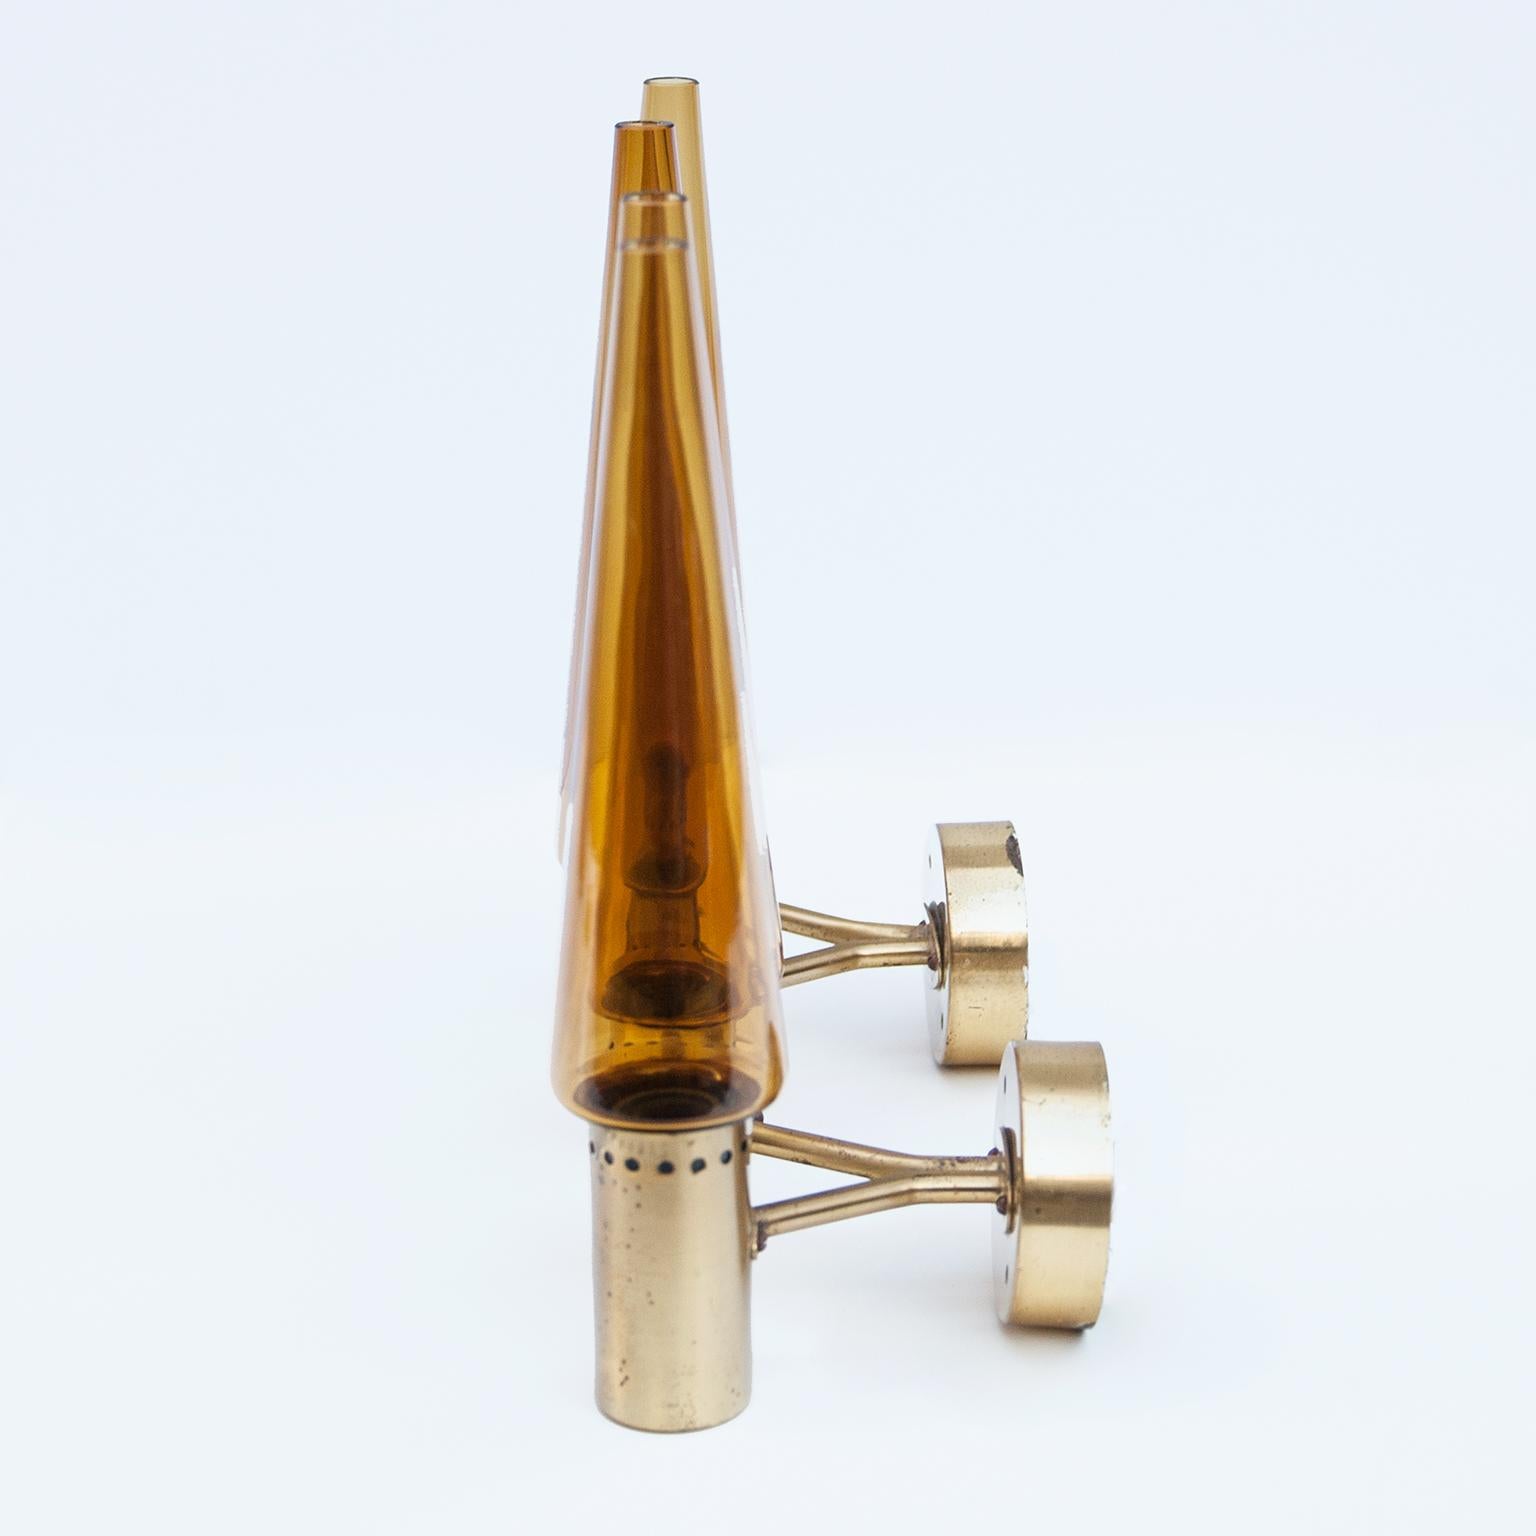 Pair of sconces by Hans Agne Jakobsson in brown orange glass and a brass wall bracket. 
The complete set includes seven early wall sconces by Hans-Agne Jakobsson for his own company in Markaryd, Sweden 1960s. See my other listings.
One features a